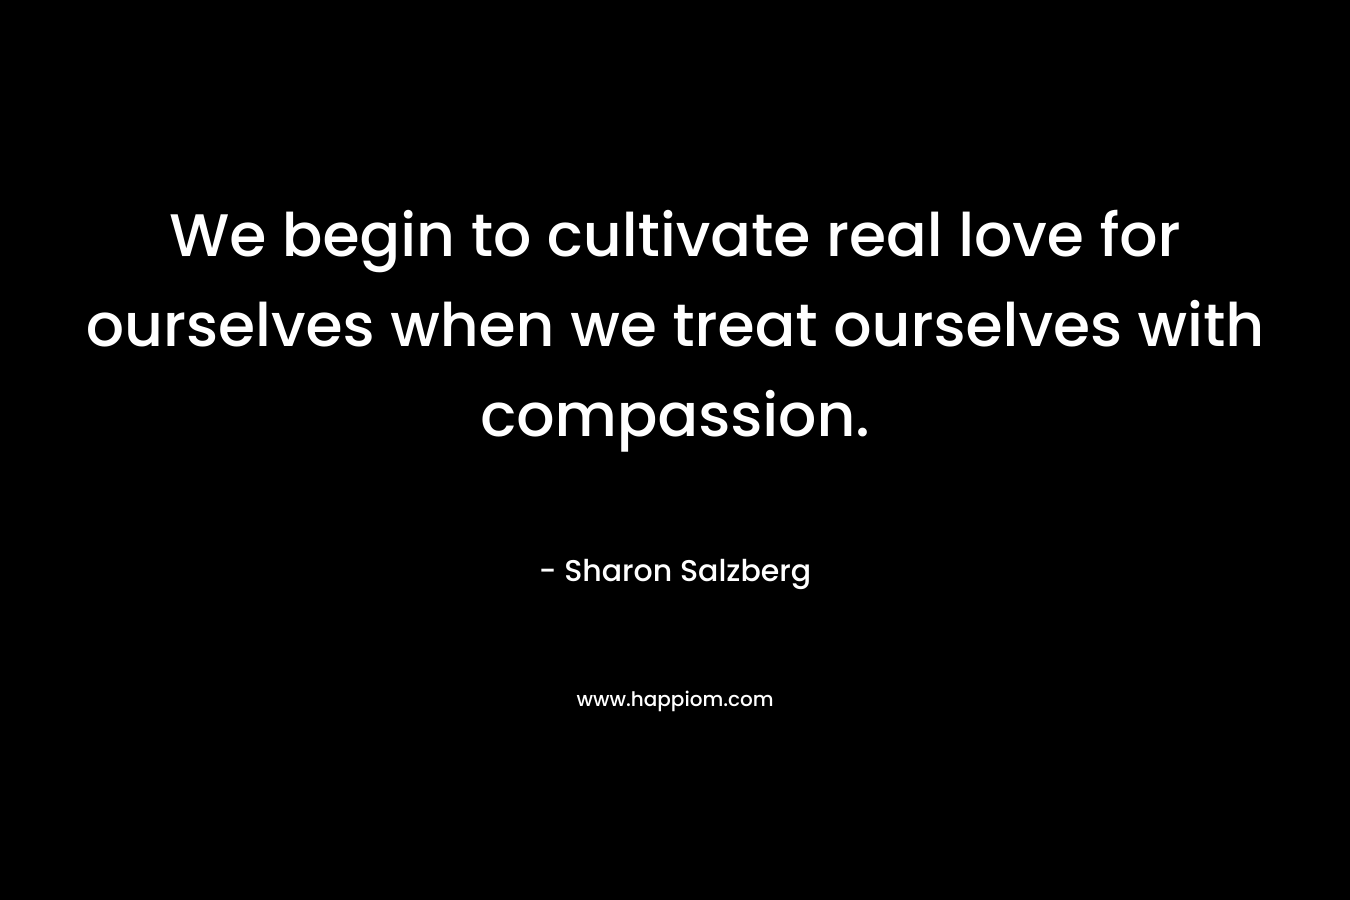 We begin to cultivate real love for ourselves when we treat ourselves with compassion.